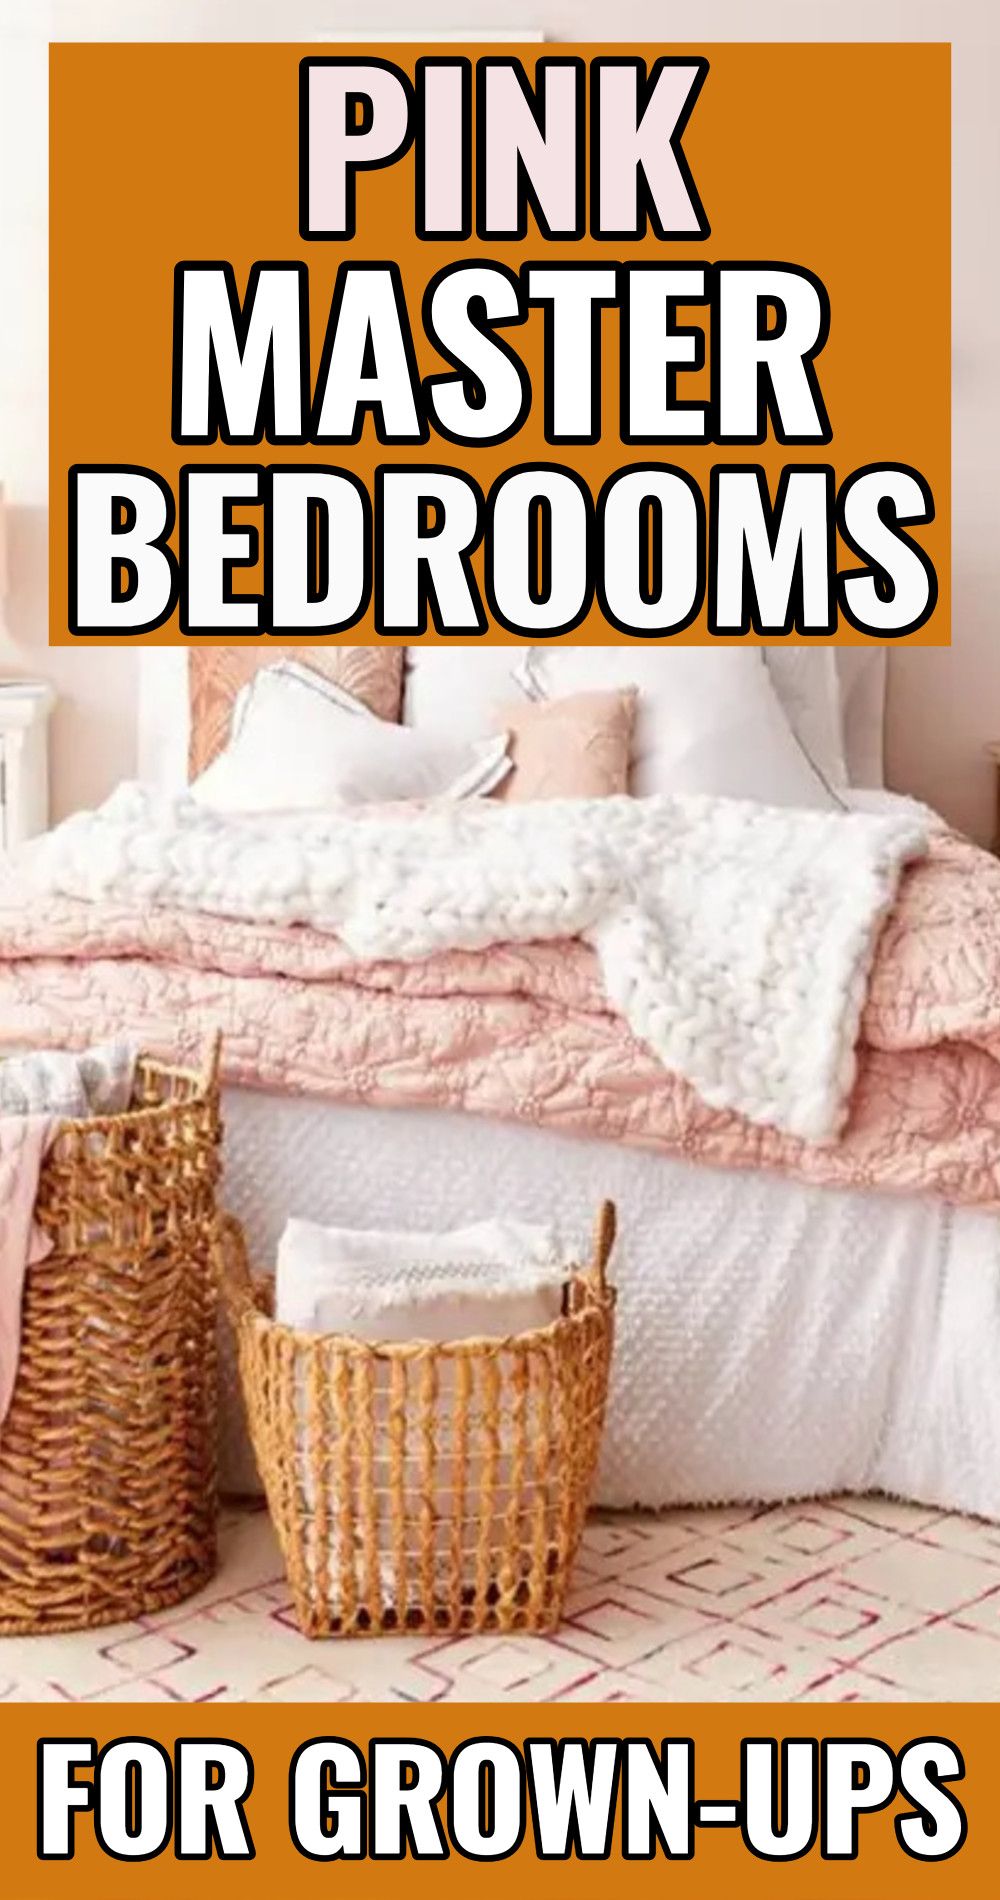 Pink Master Bedrooms For Grown Ups - Romantic cozy bedroom ideas for adults